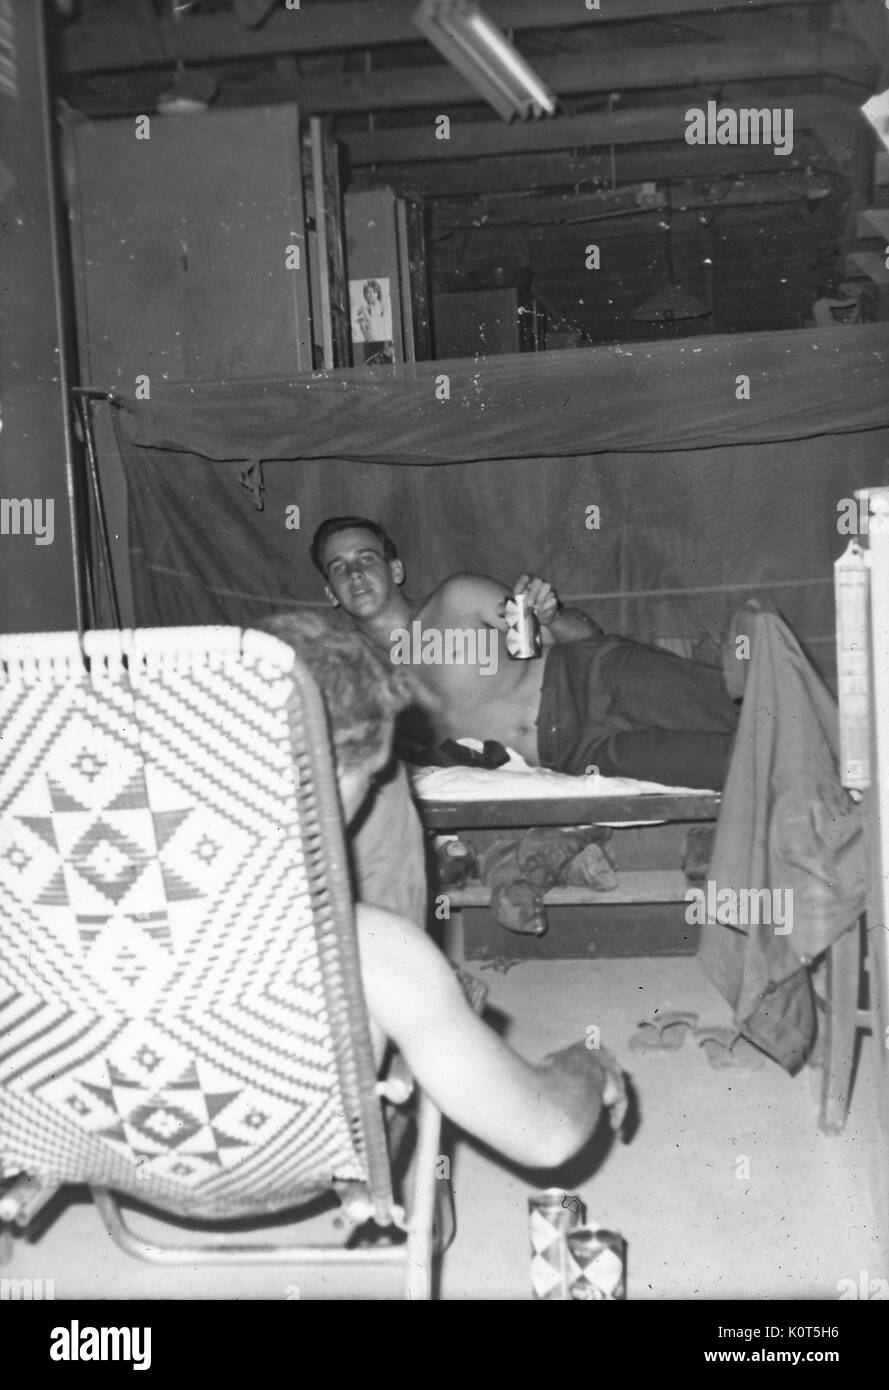 A photograph of two United States Army serviceman socializing in their barracks, one soldier is lying in bed and holding a can of Coca Cola, another serviceman sits in a lawn chair and has several Coke cans on the ground beside him, Vietnam, 1967. Stock Photo